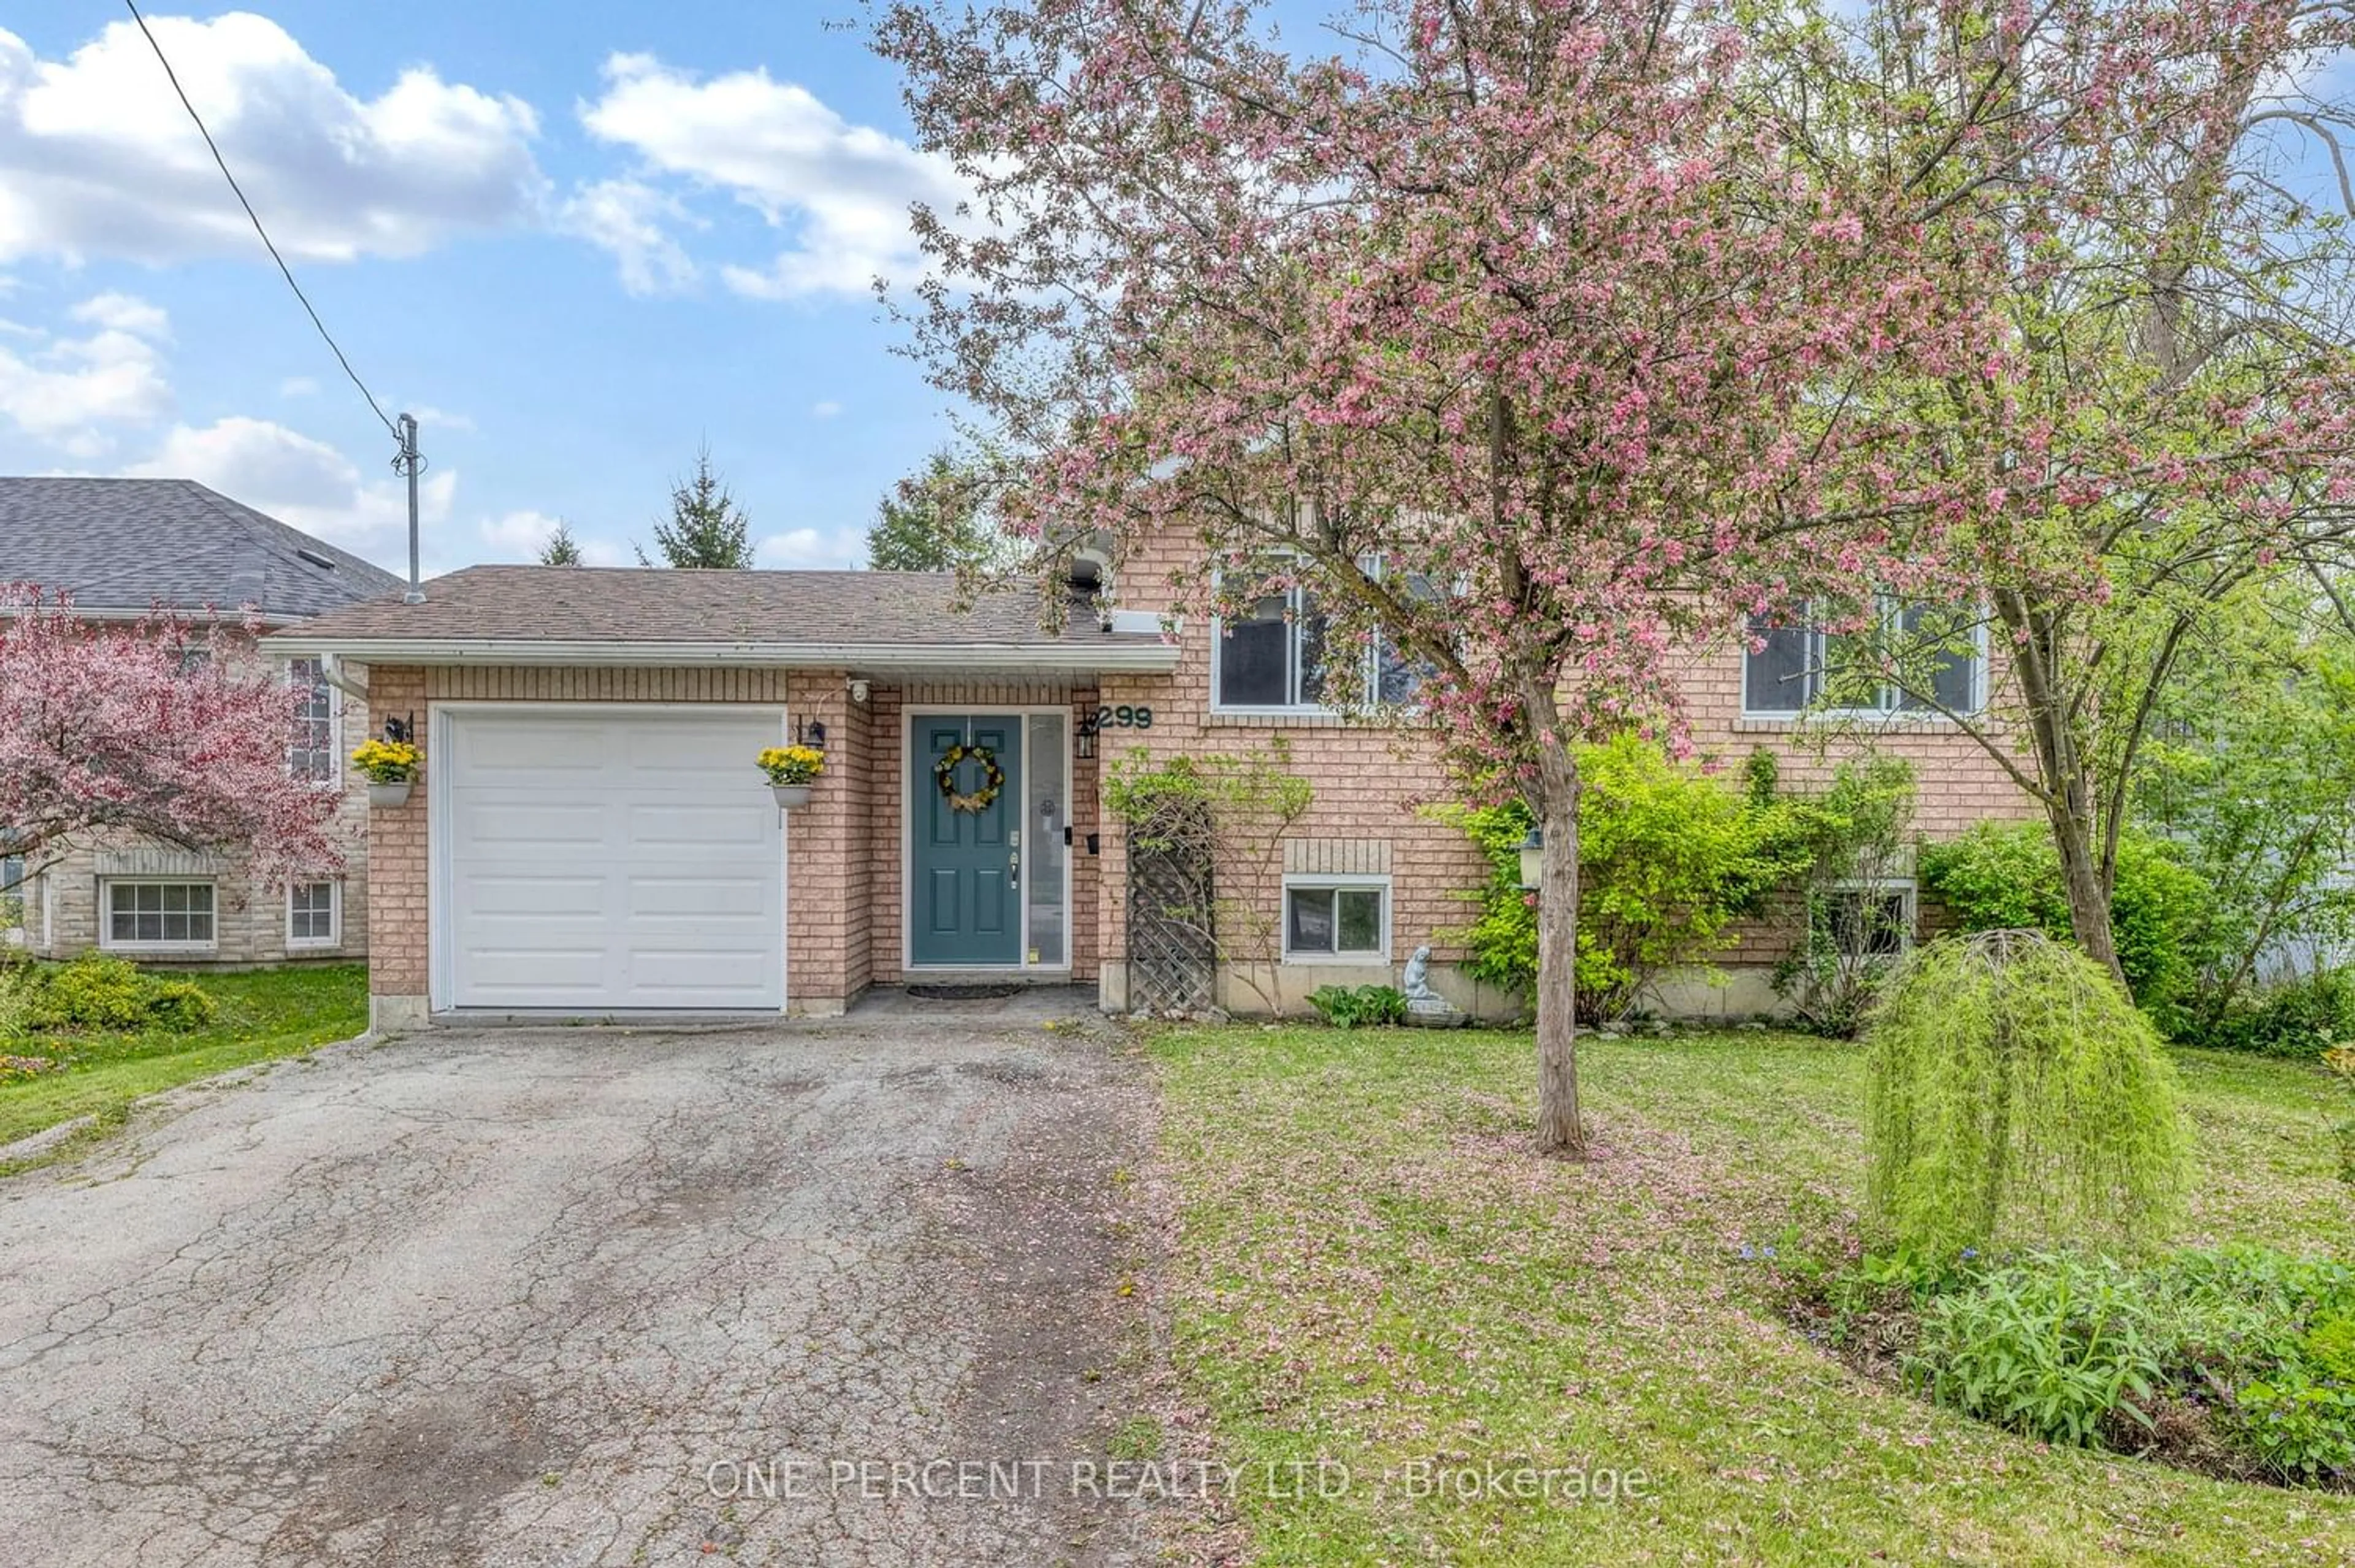 Frontside or backside of a home for 299 Cedarholme Ave, Georgina Ontario L4P 2W5